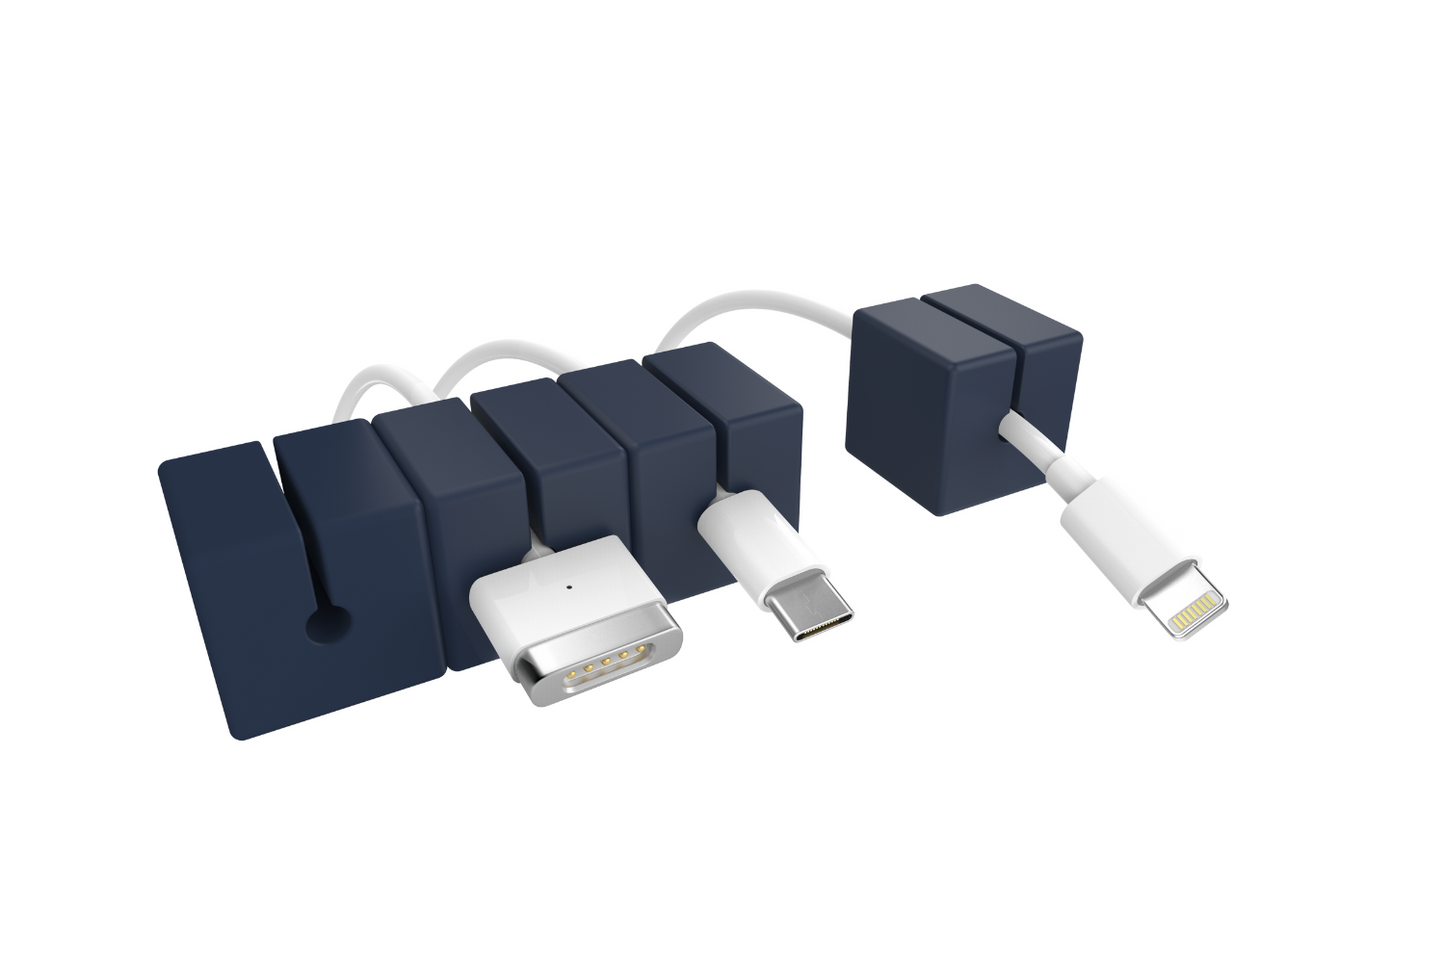 
                  
                    CABLE BLOCKS - NAVY (4 PACK)
                  
                